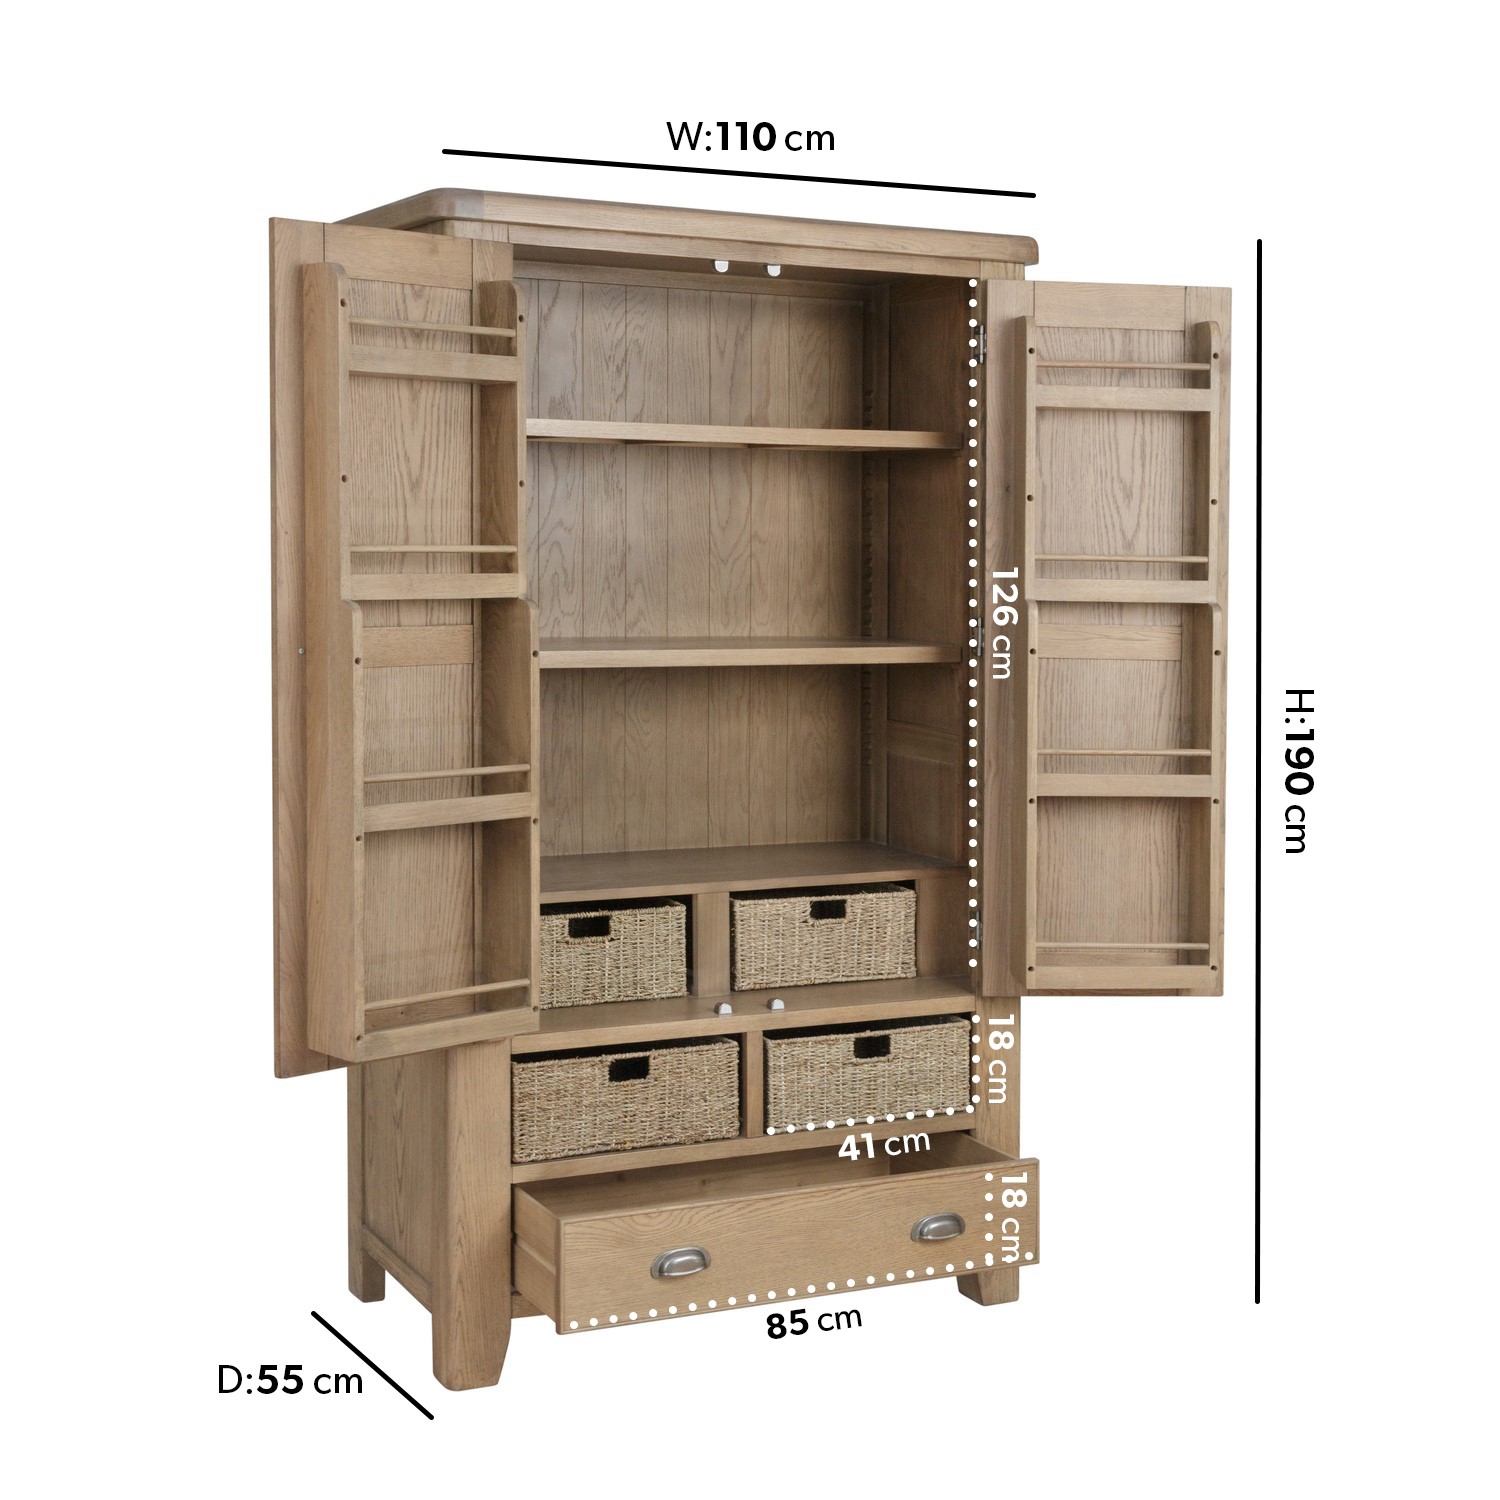 Read more about Smoked oak display cabinet with wicker baskets